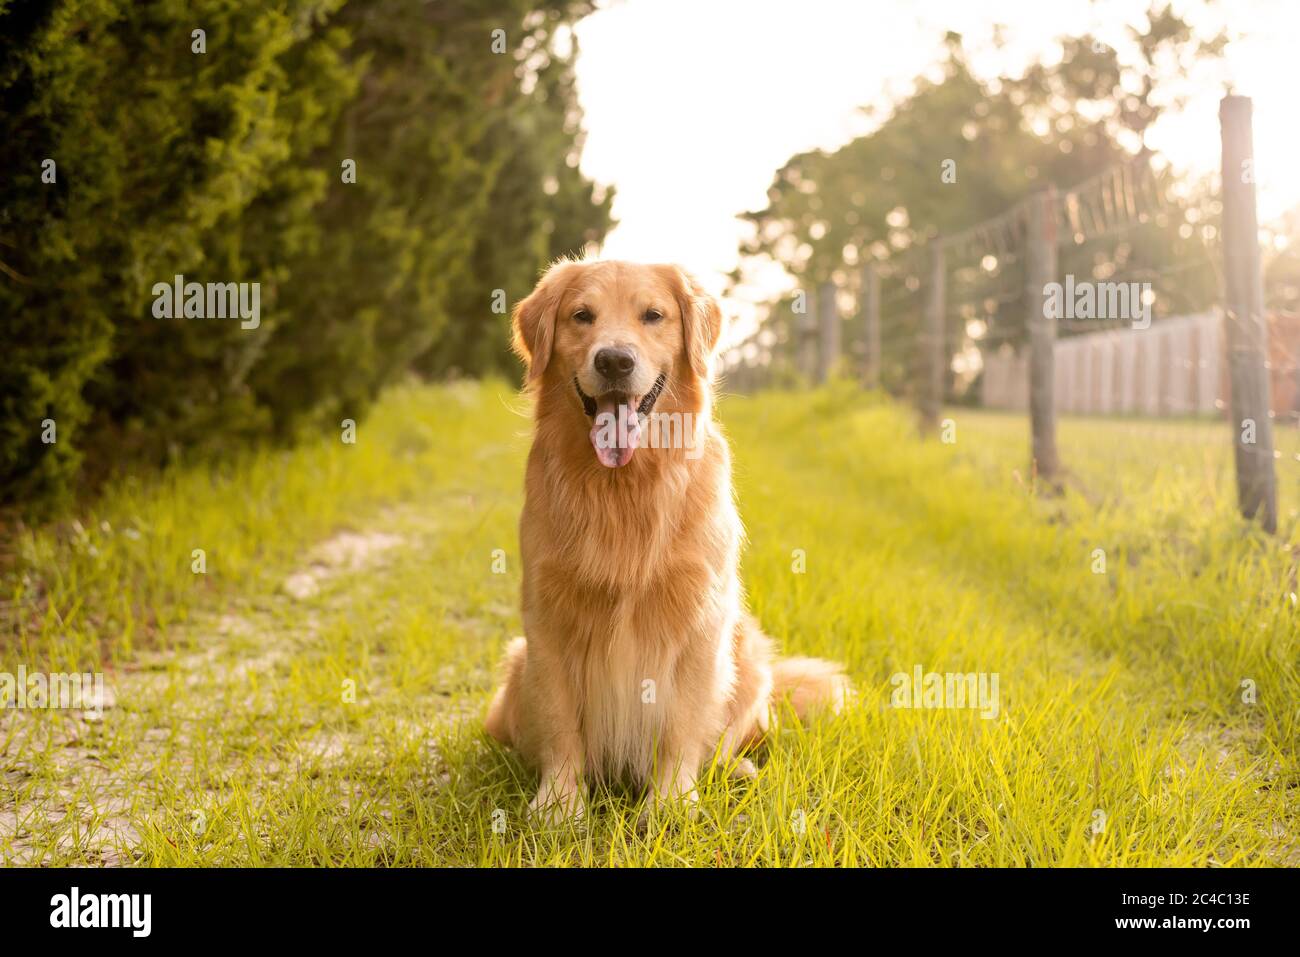 Close up of purebred  golden retriever dog outdoors on country road at sunset Stock Photo